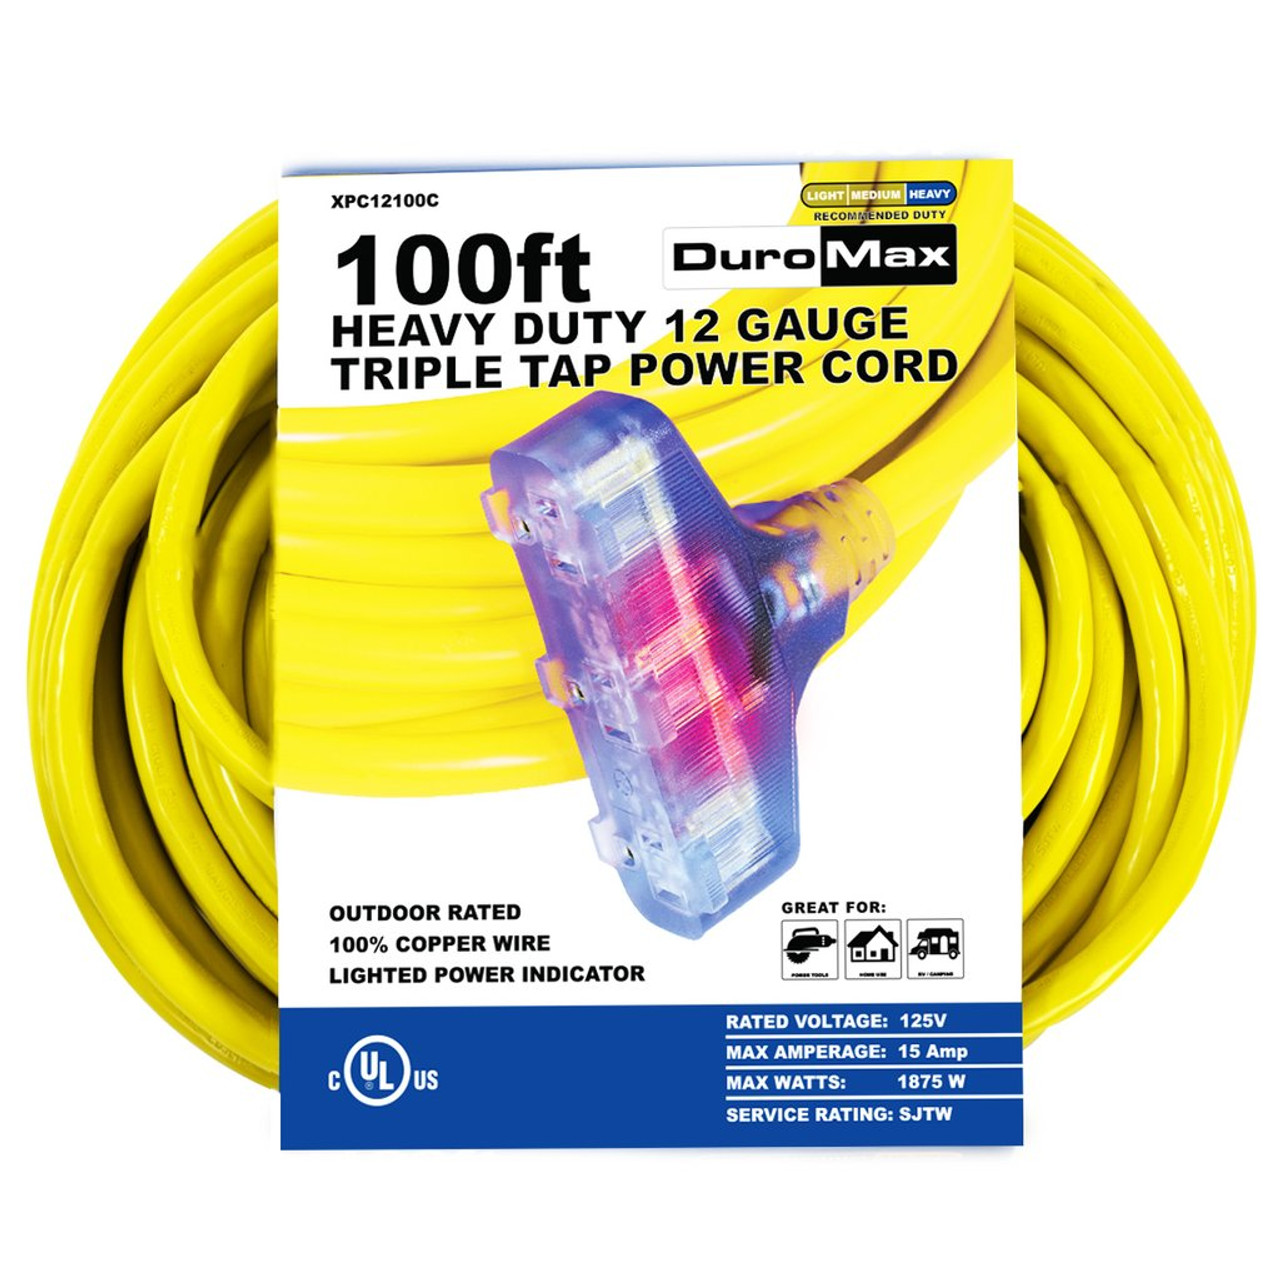 DuroMax 12 Gauge Extension Cord 100 Ft Triple Outlet